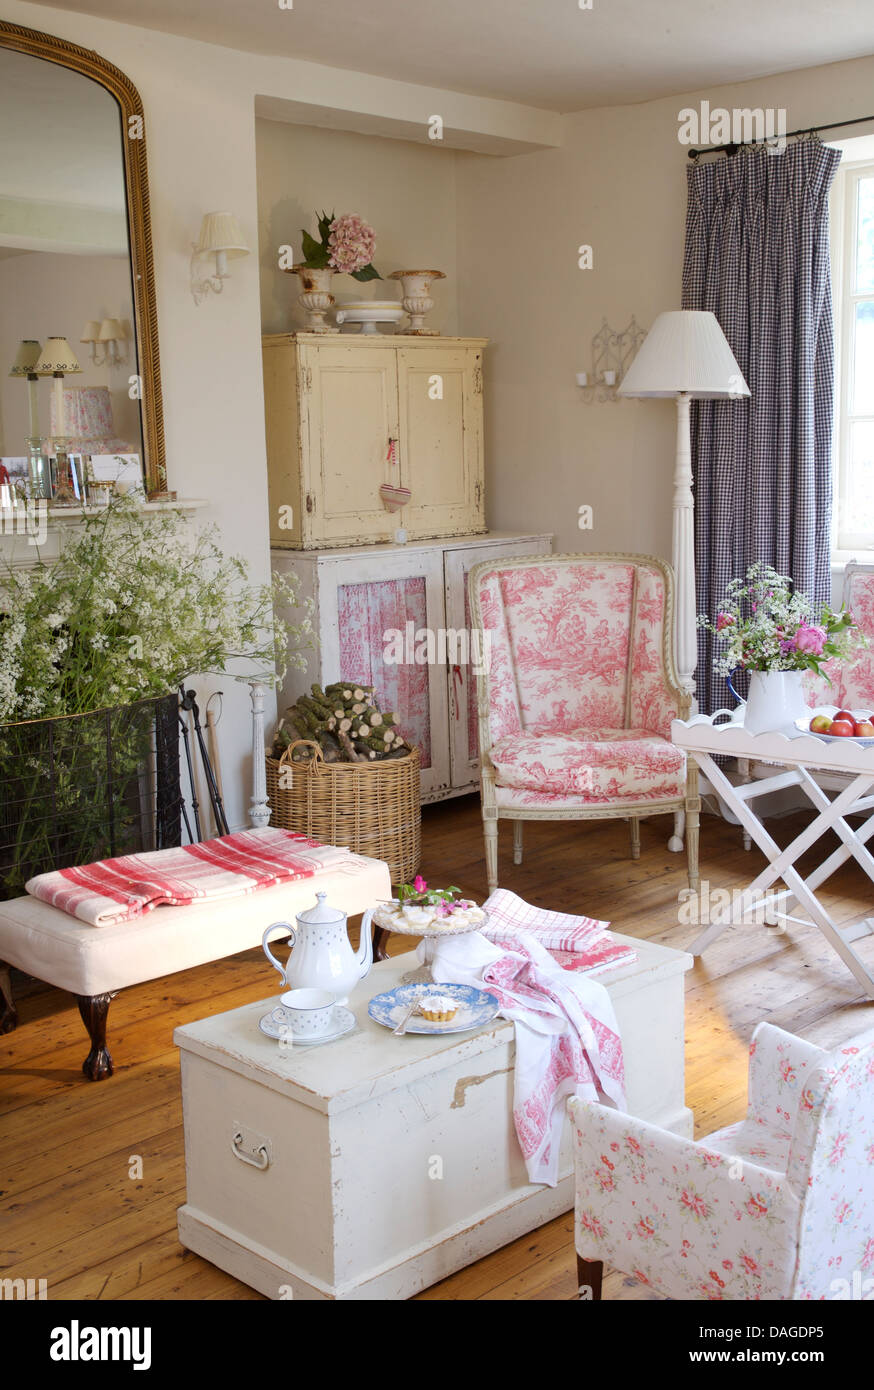 Coffee pot on white painted chest in cottage living room with pink Toile de Jouy chair and floral chair Stock Photo